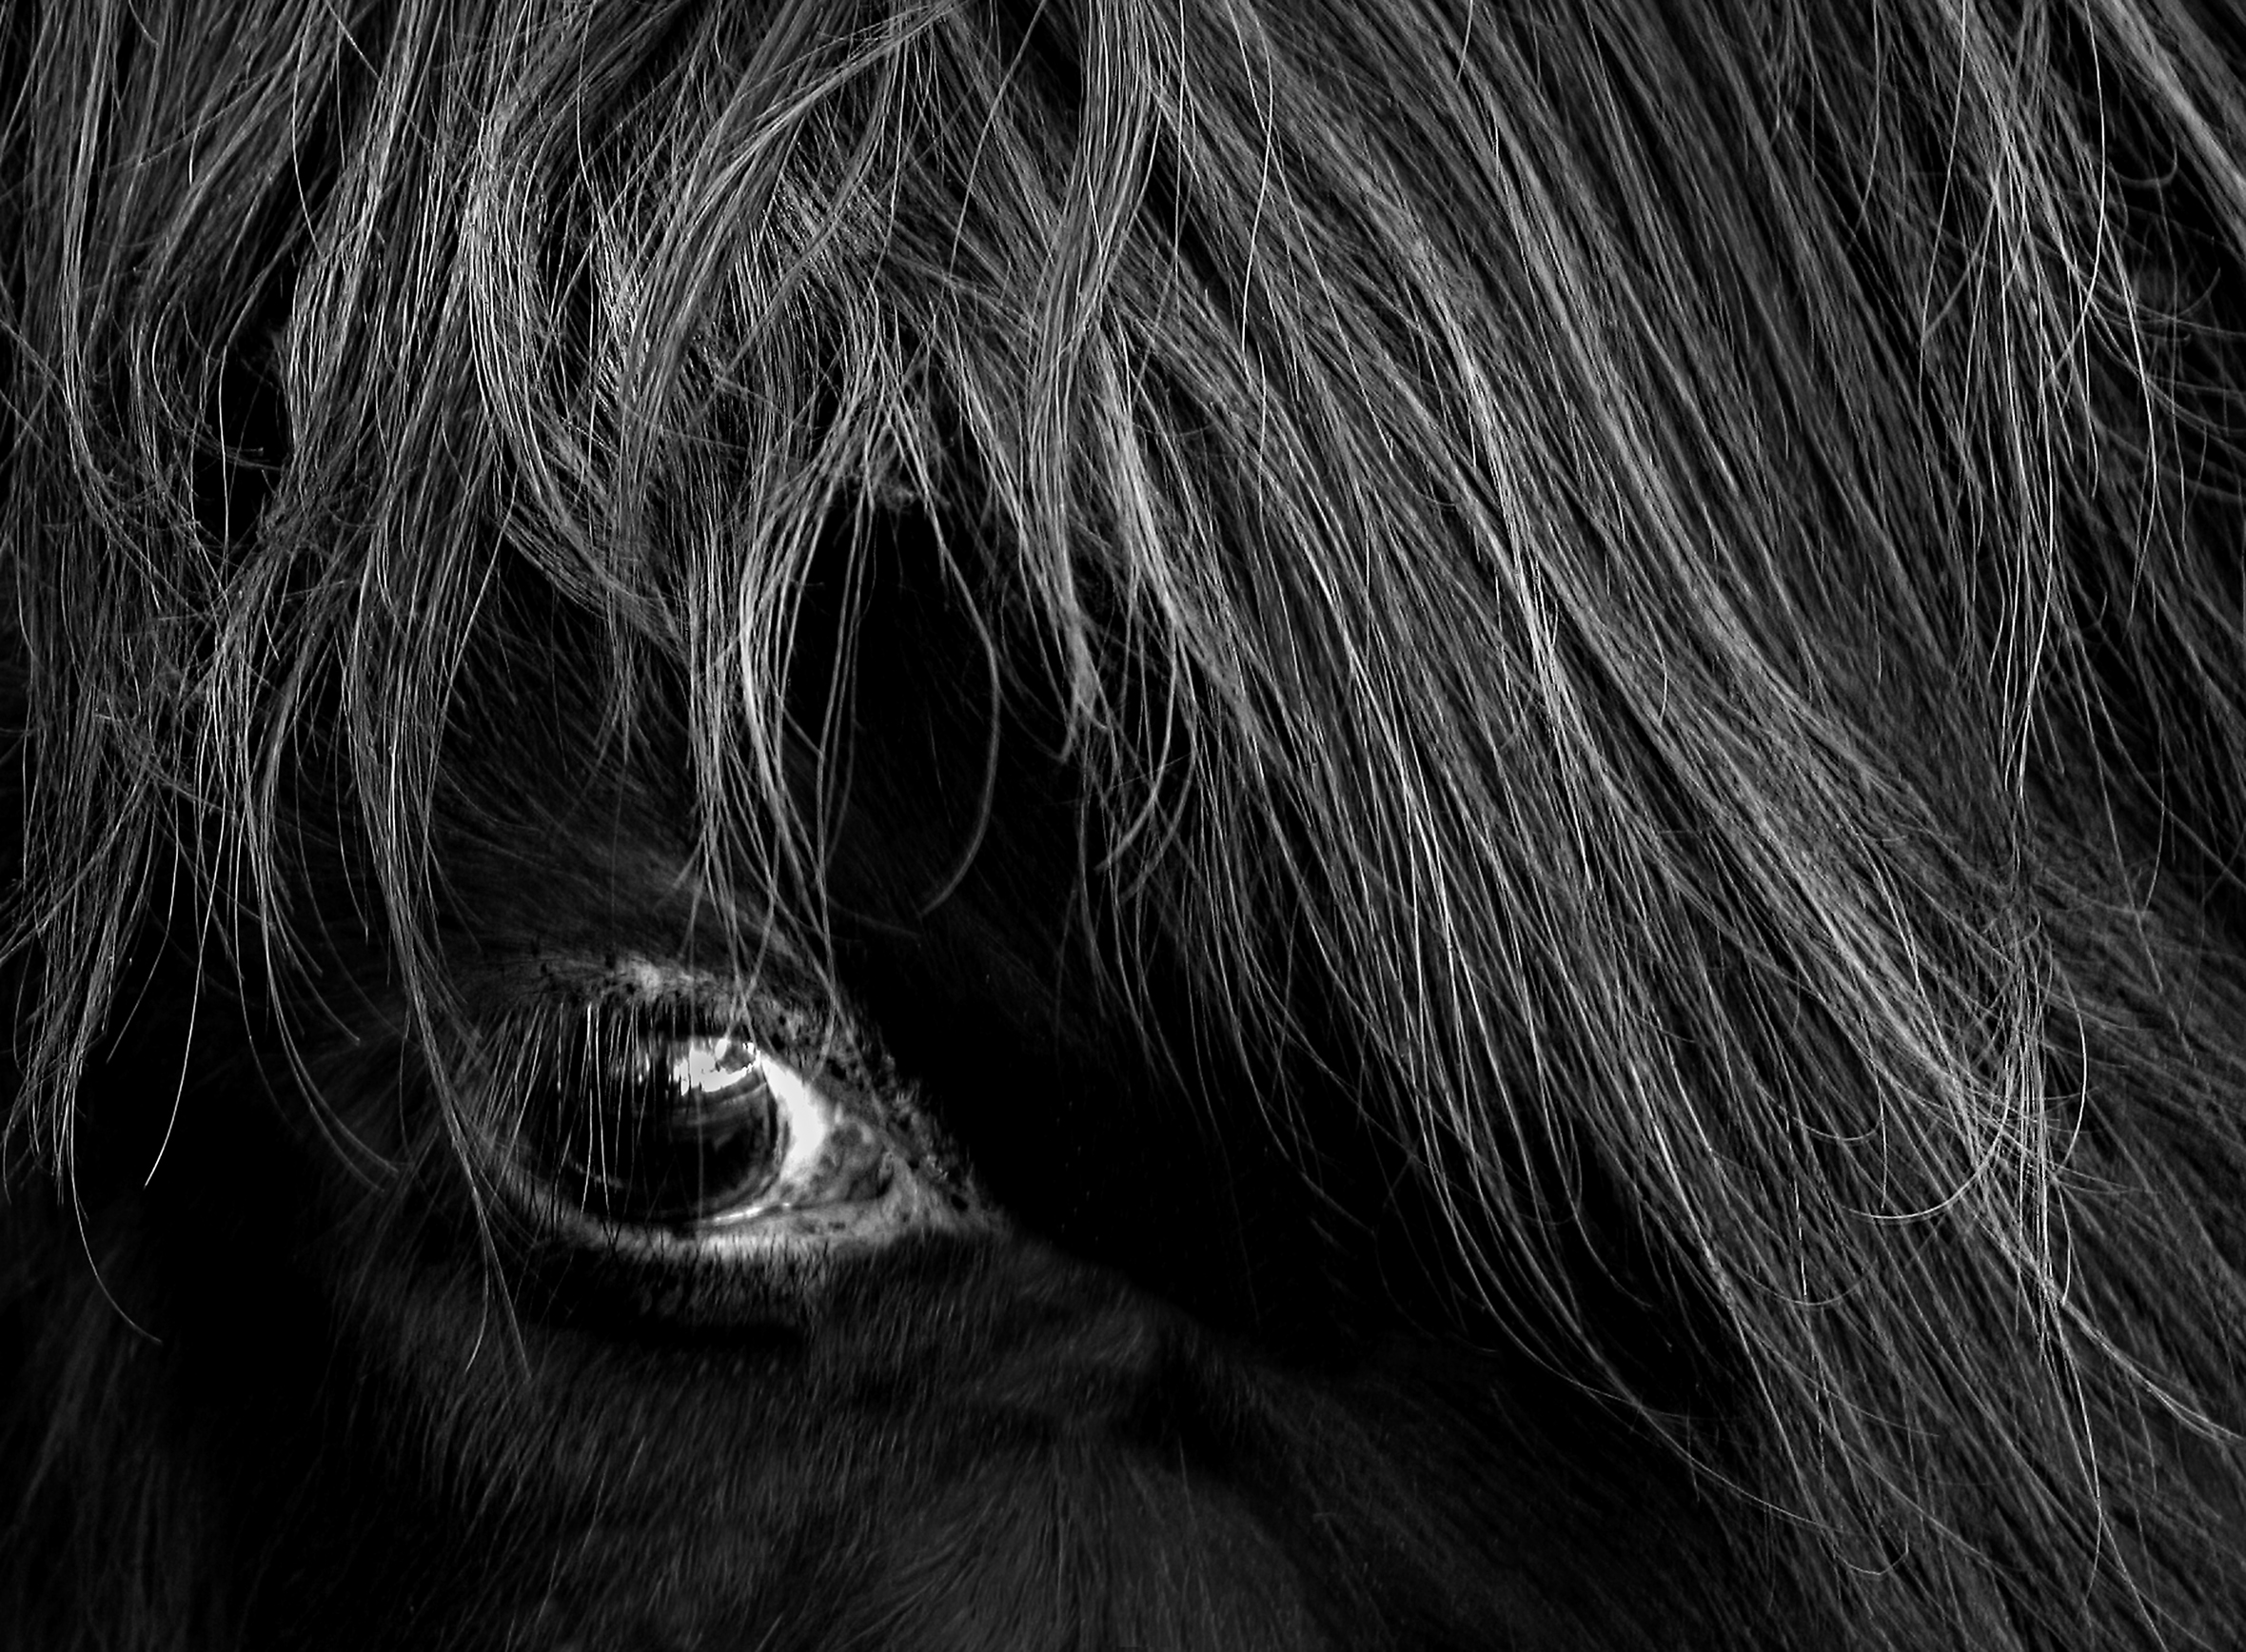 Close-up of a horse's eye. The horse is black with a gray mane.